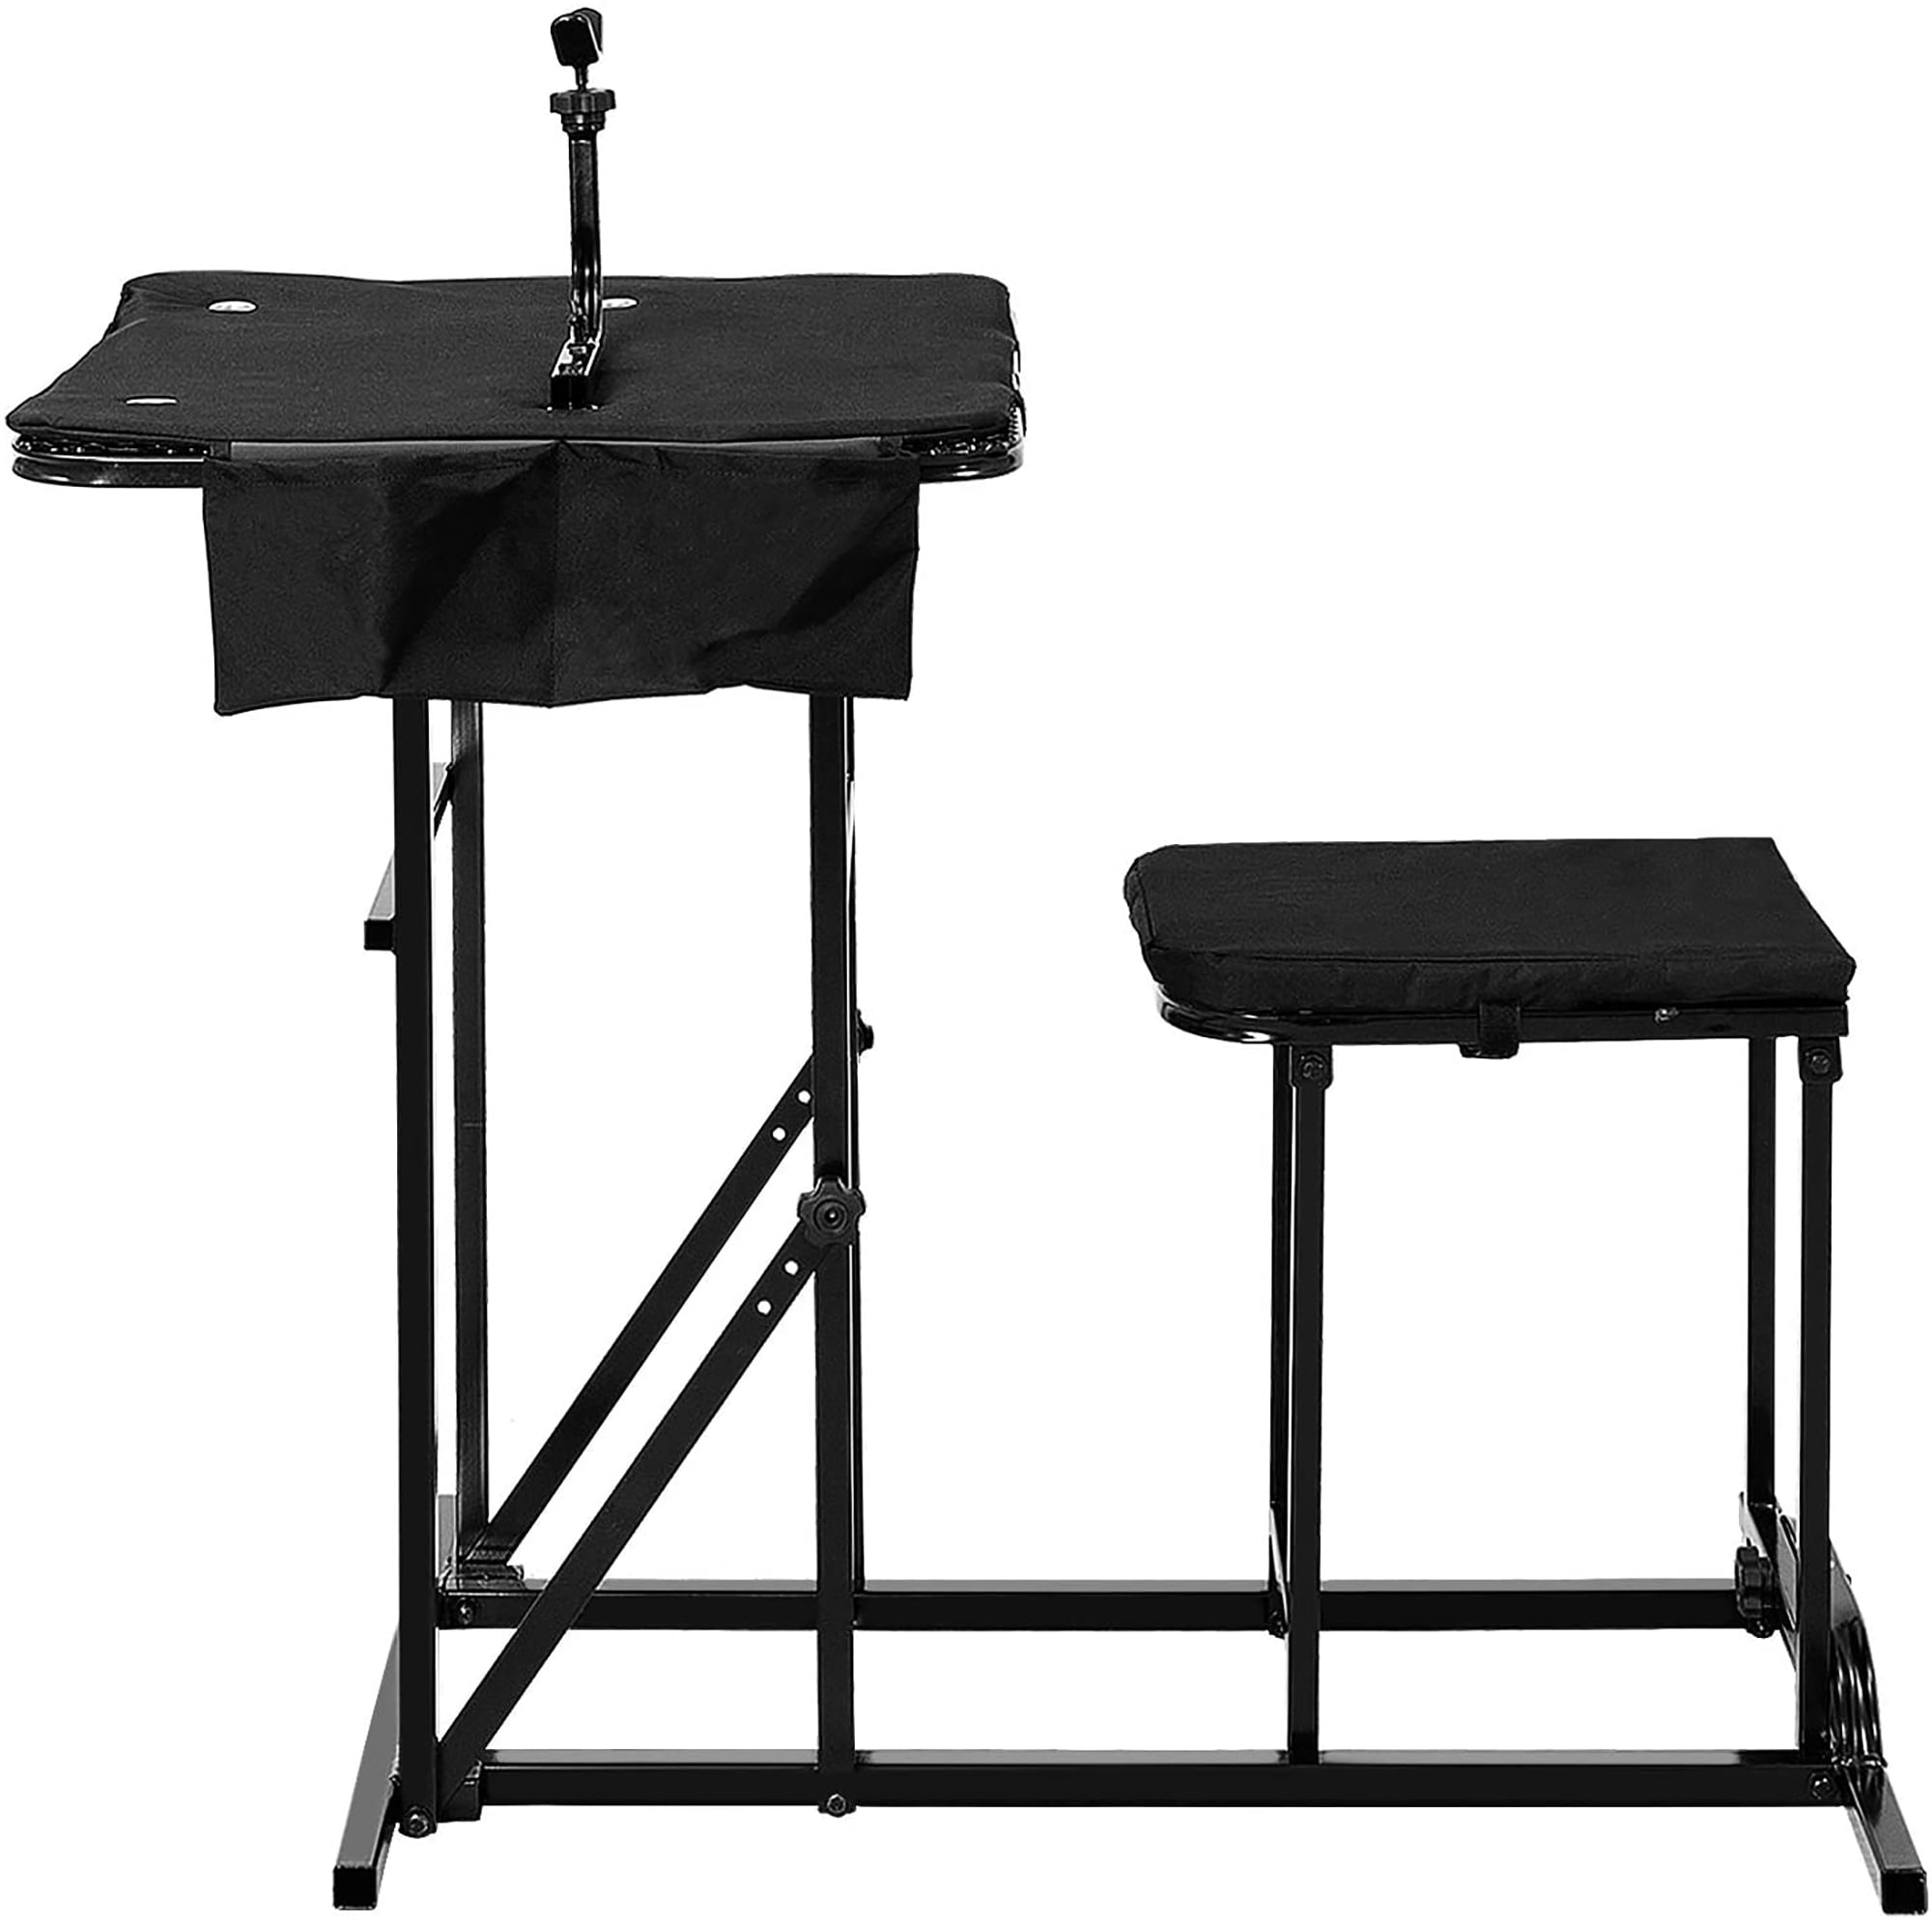 45" X 26" X 32" Details about    OD Green Foldable Shooting Utility Table 